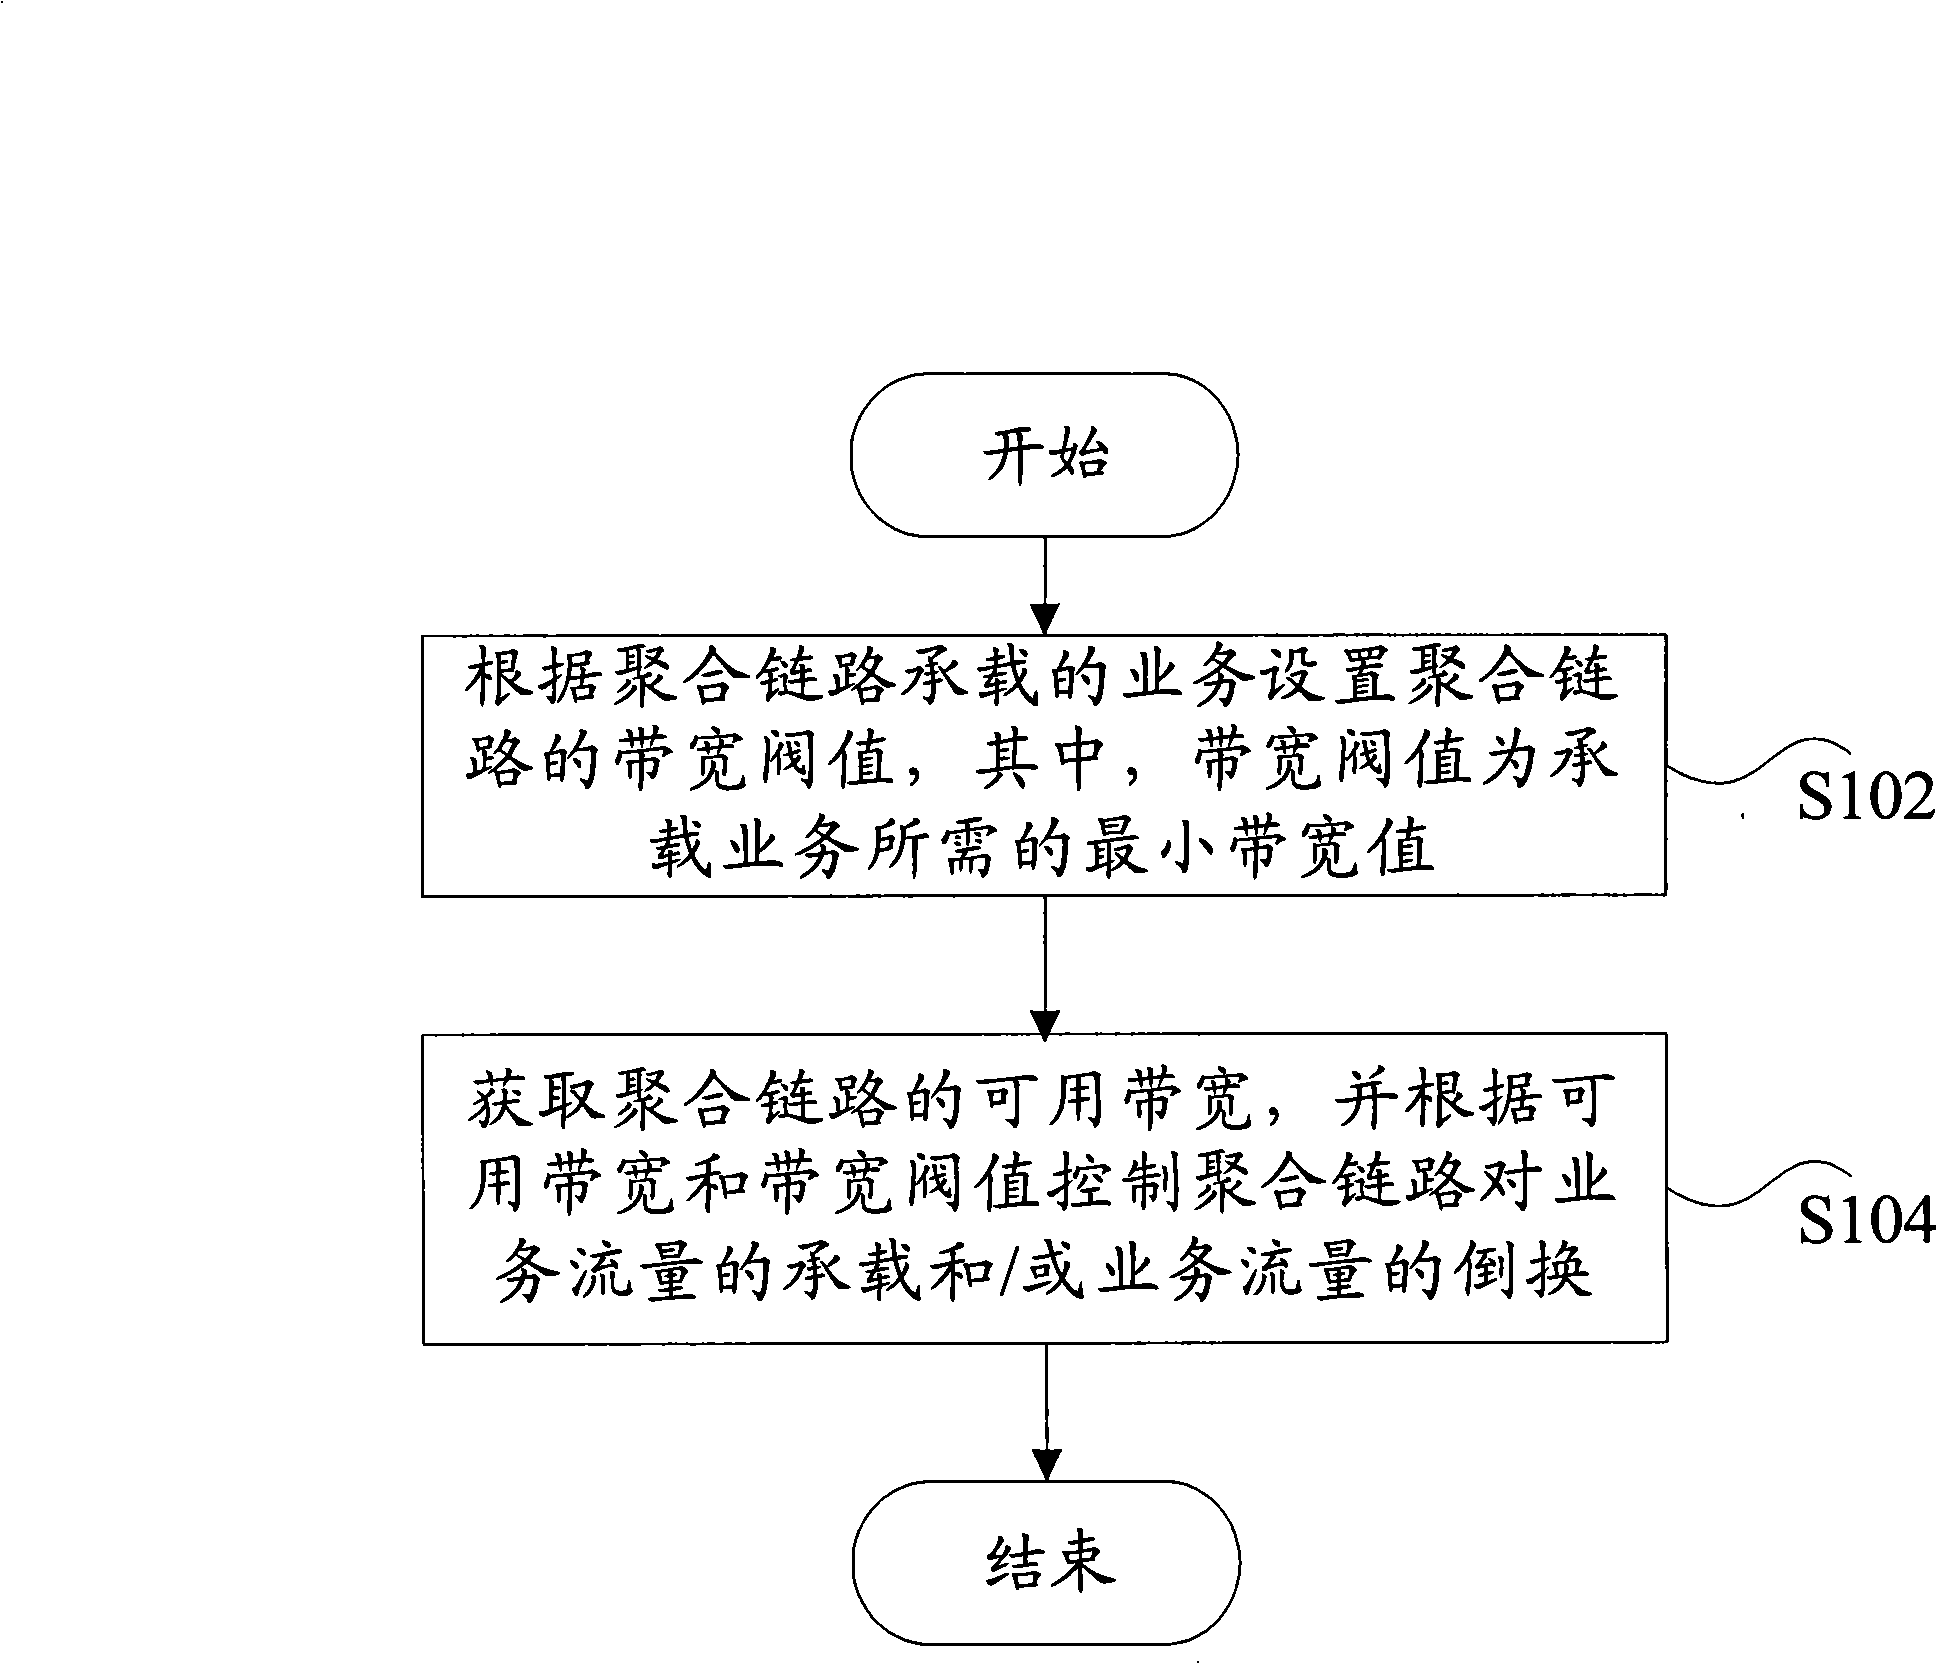 Aggregation link management method and apparatus